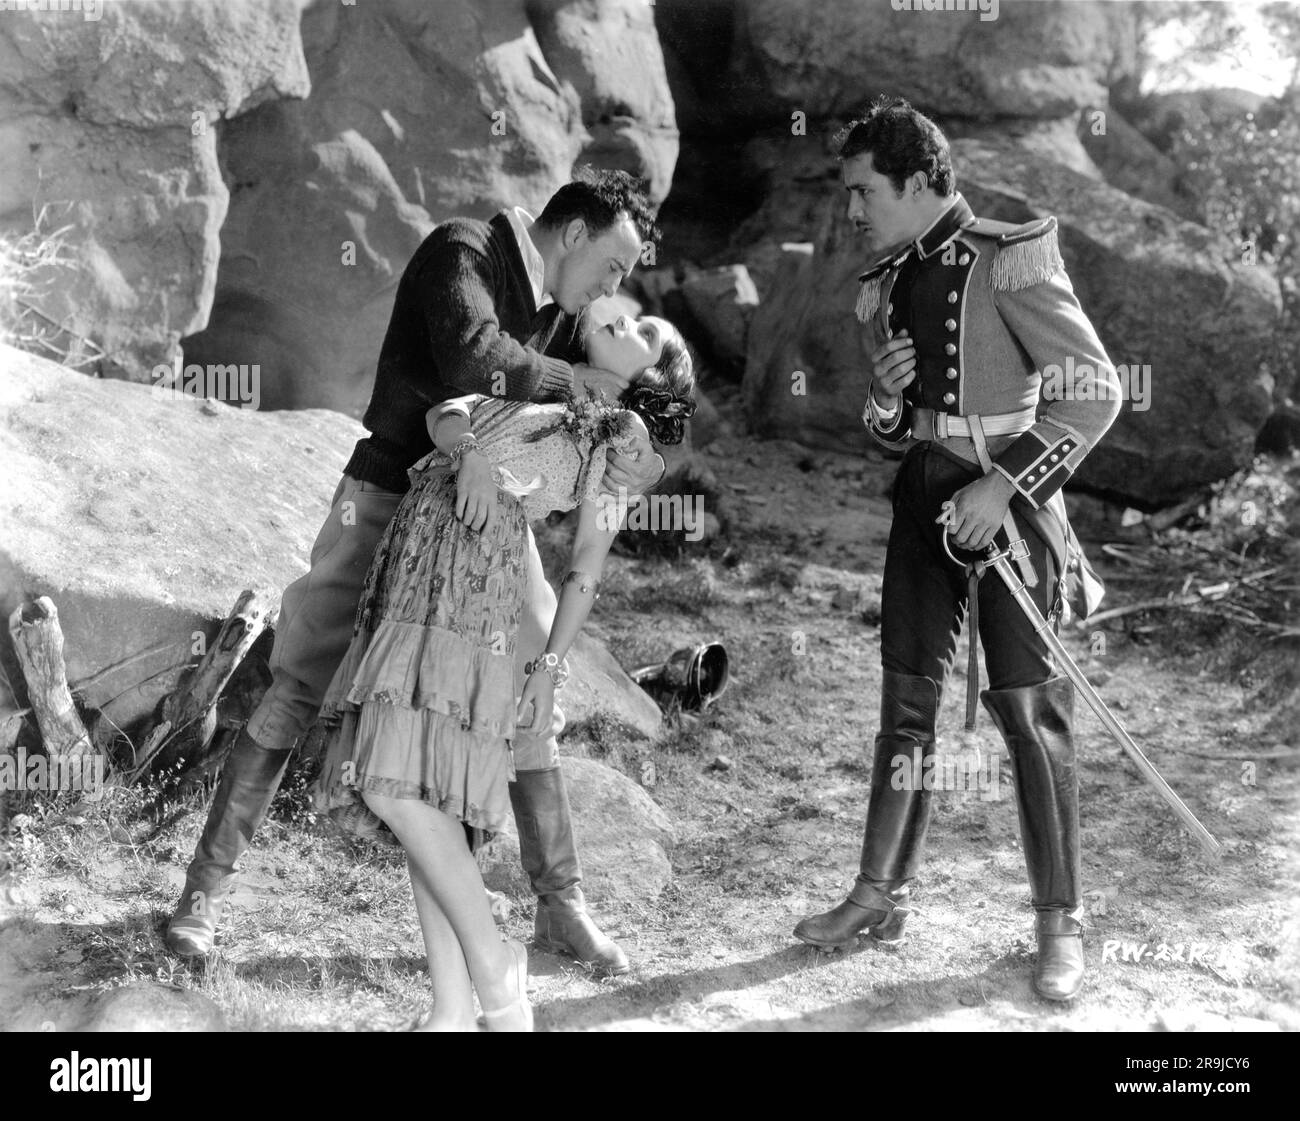 Director RAOUL WALSH DOLORES DEL RIO and DON ALVARADO on set location rehearsal candid during filming of THE LOVES OF CARMEN 1927 director RAOUL WALSH novel Prosper Merimee Fox Film Corporation Stock Photo